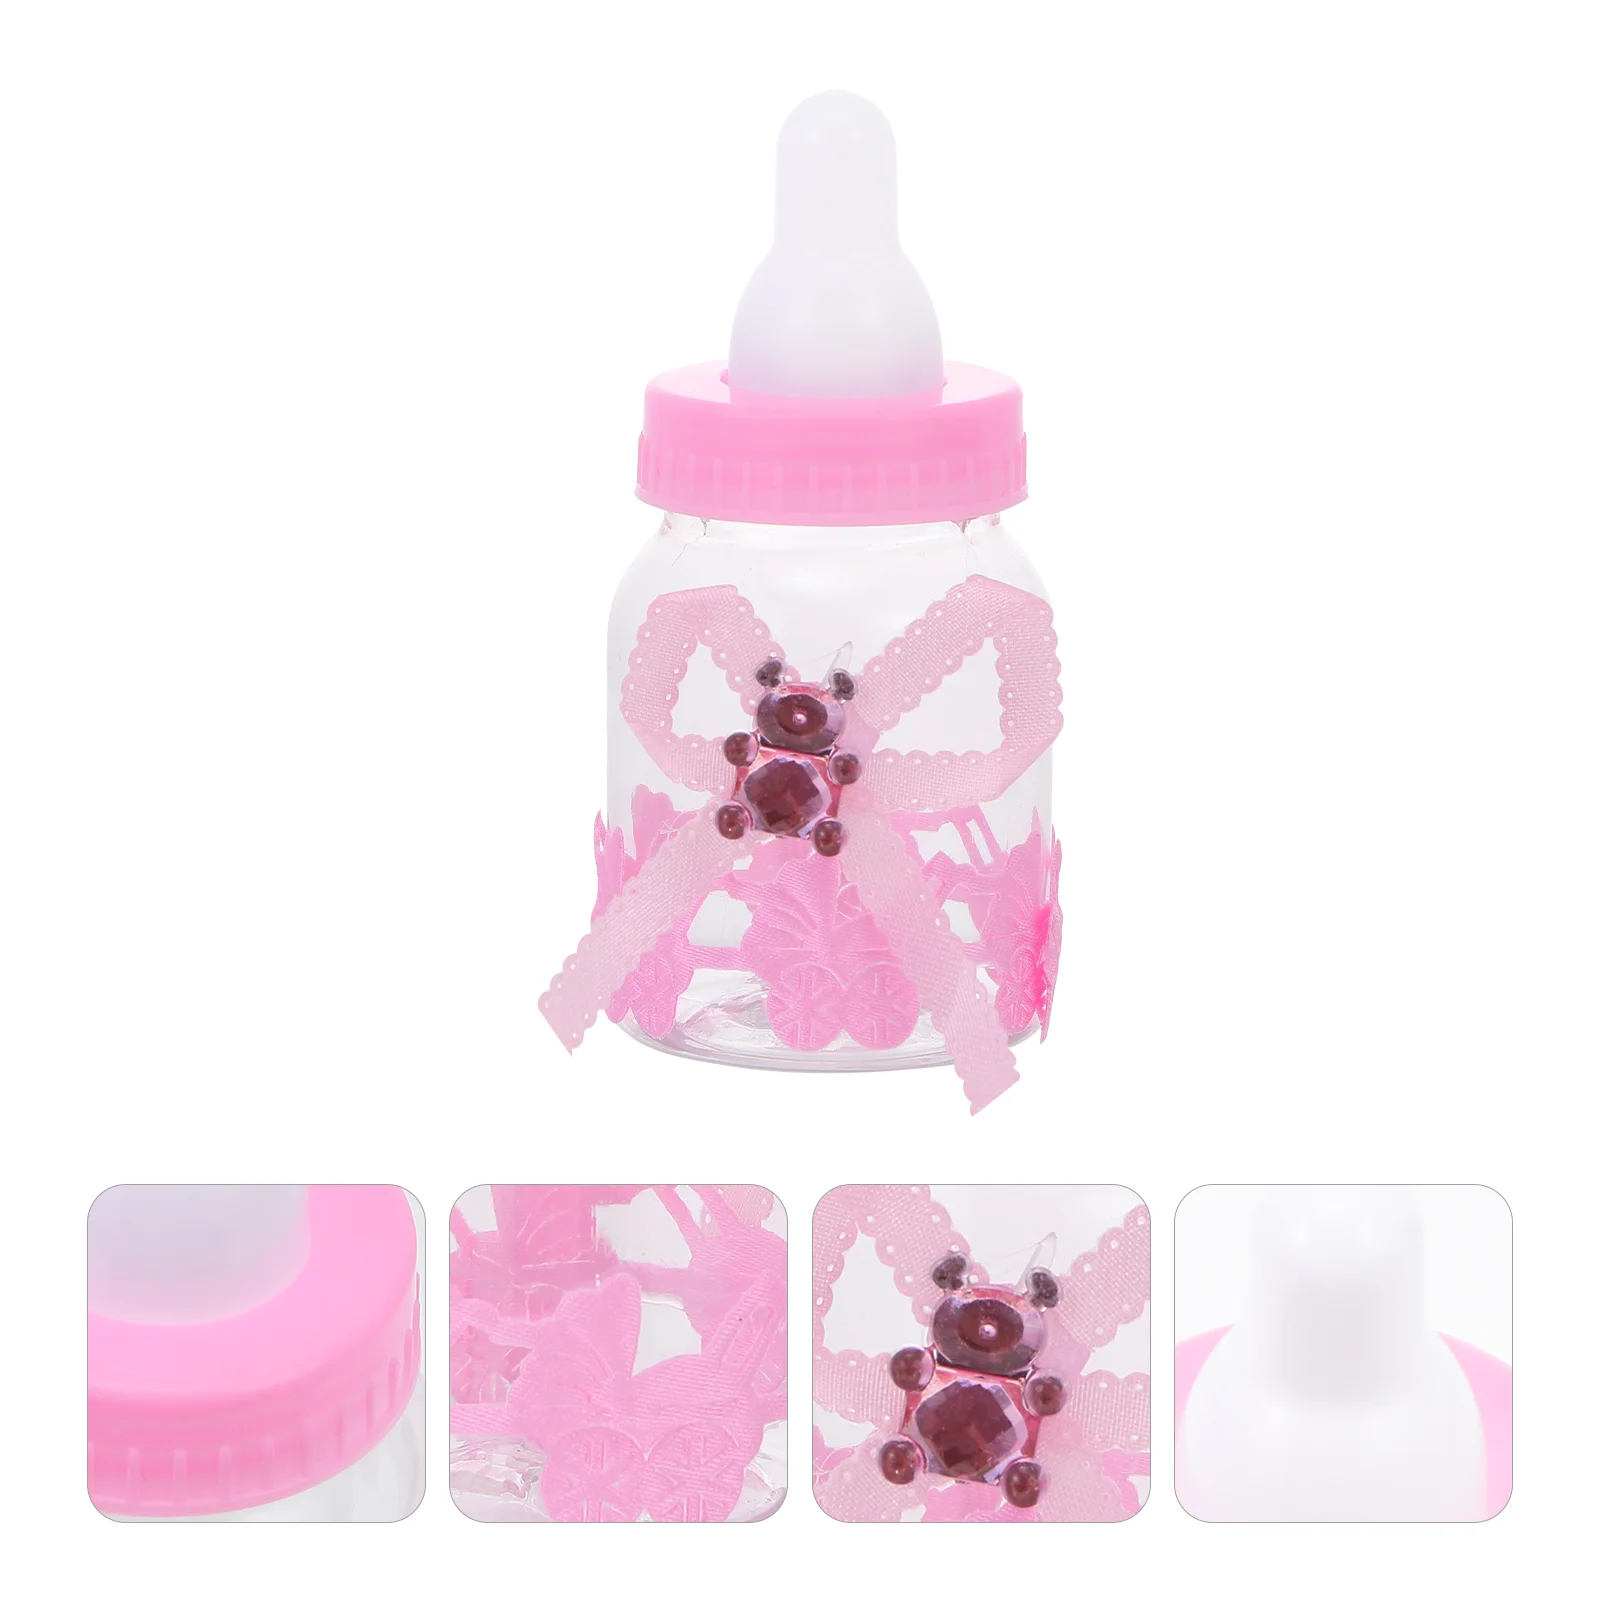 

12 Pcs Chocolate Candy Gift Box Bab Shower Gifts Baby Baptism Party Favors Containers Wedding Bear Feeding Bottle